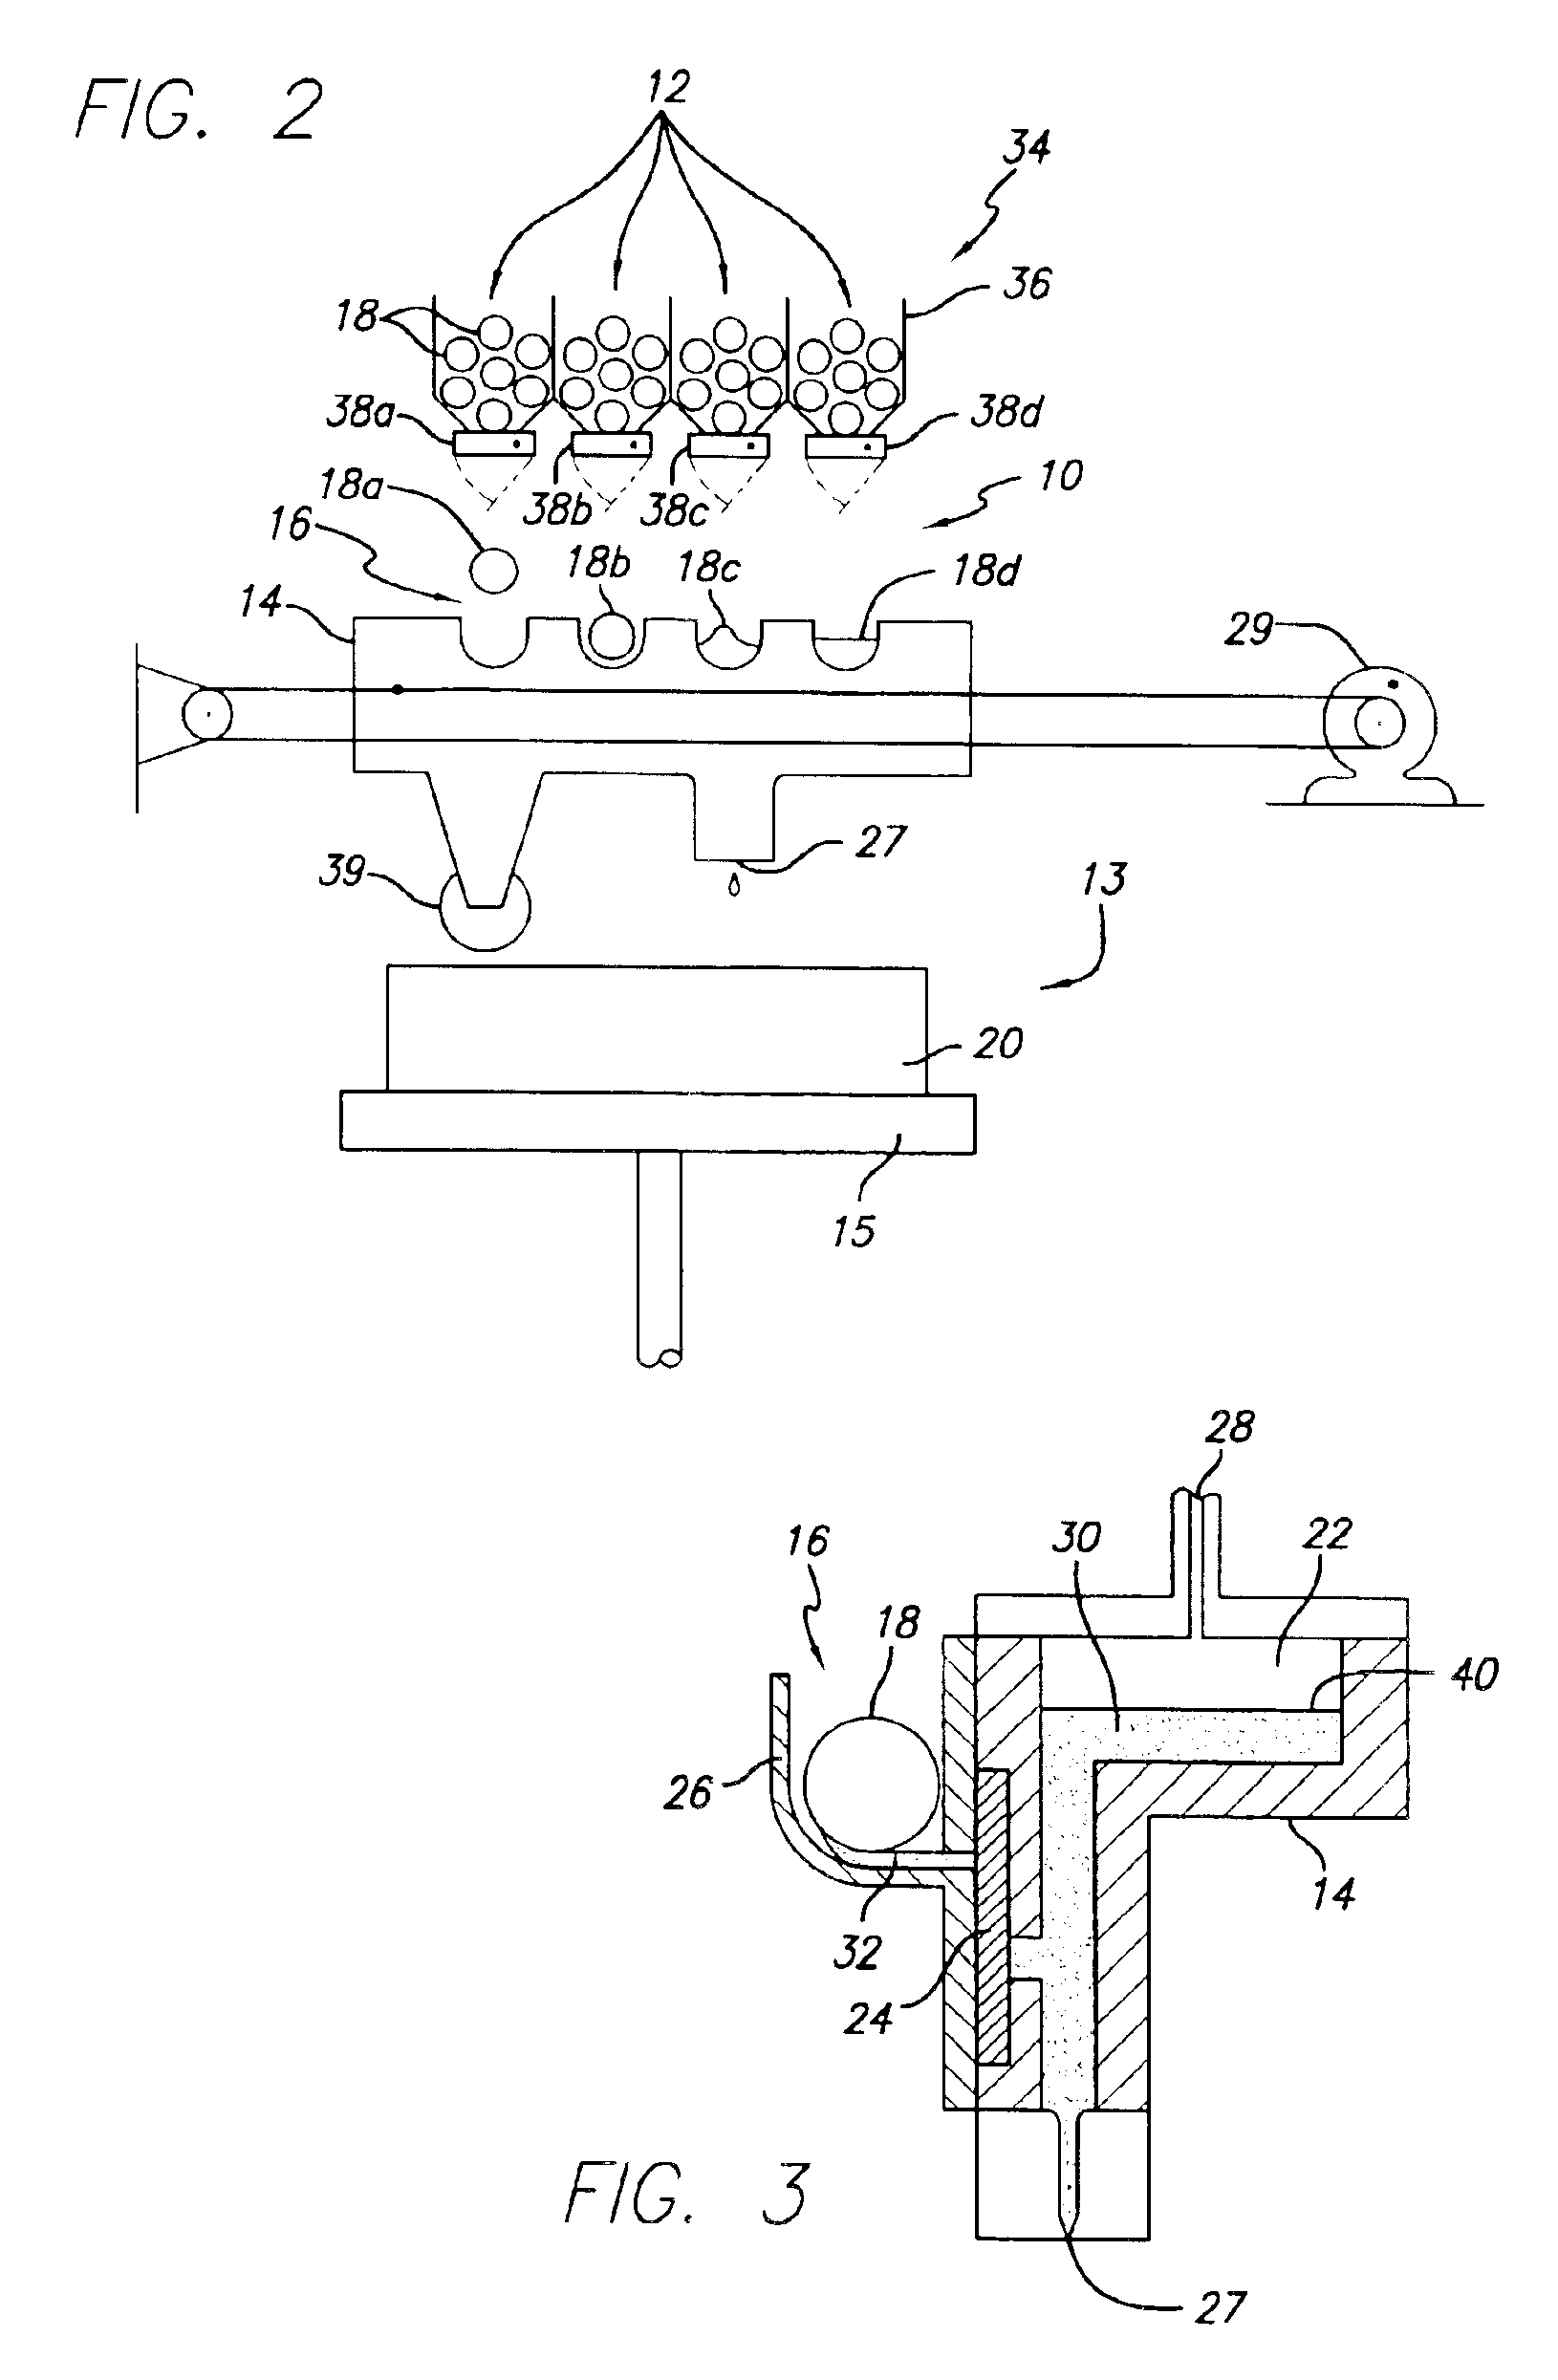 Quantized feed system for solid freeform fabrication